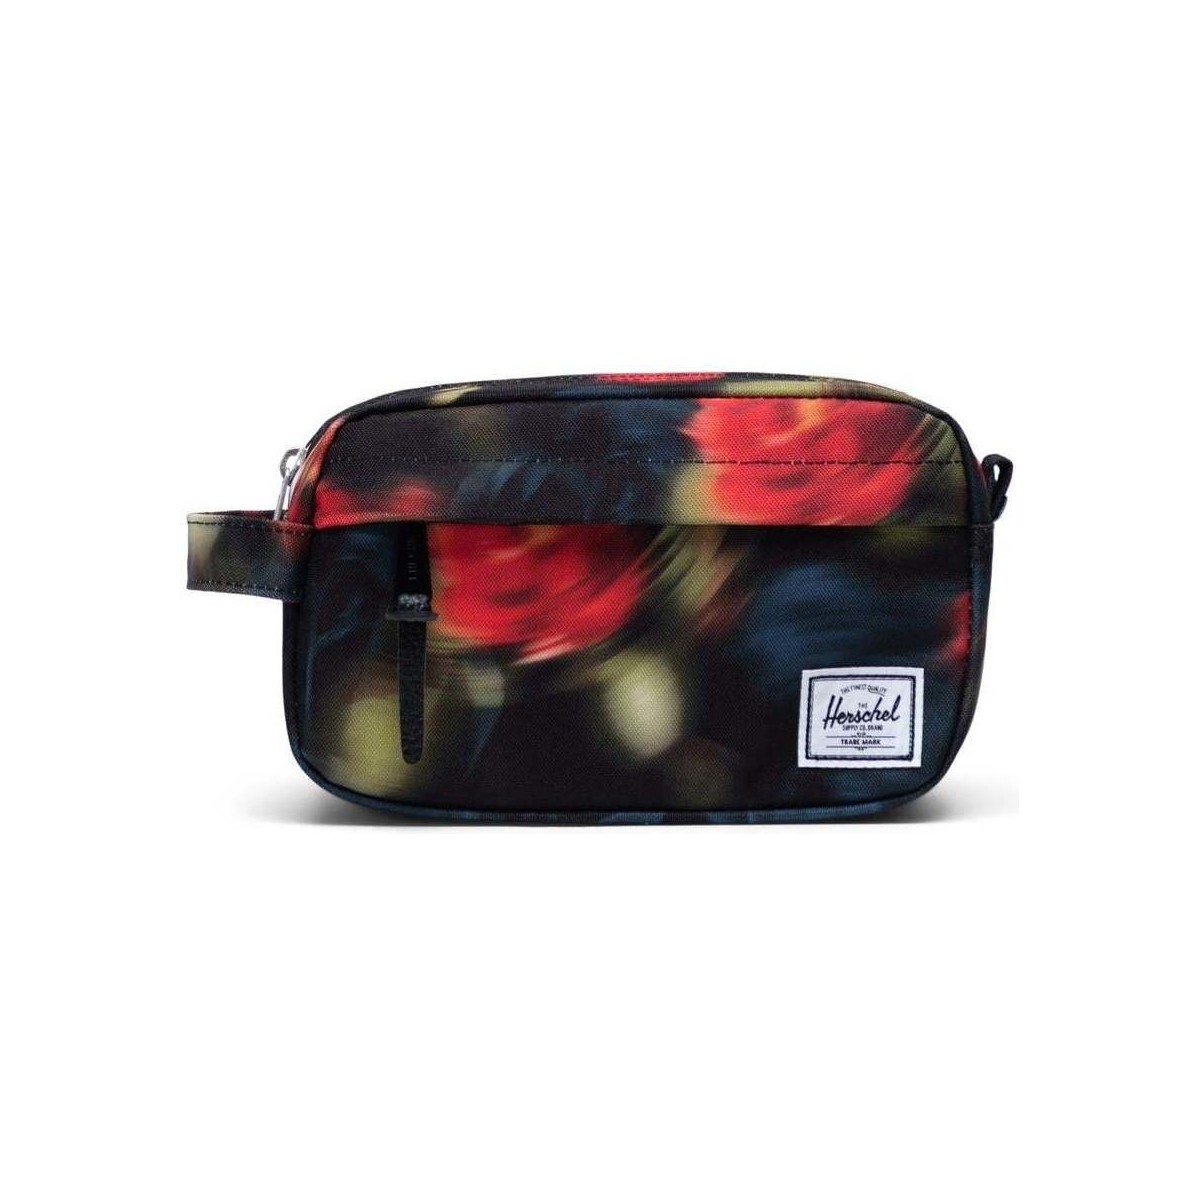 Malas Necessaire Herschel Chapter Carry On Blurry Roses Multicolor